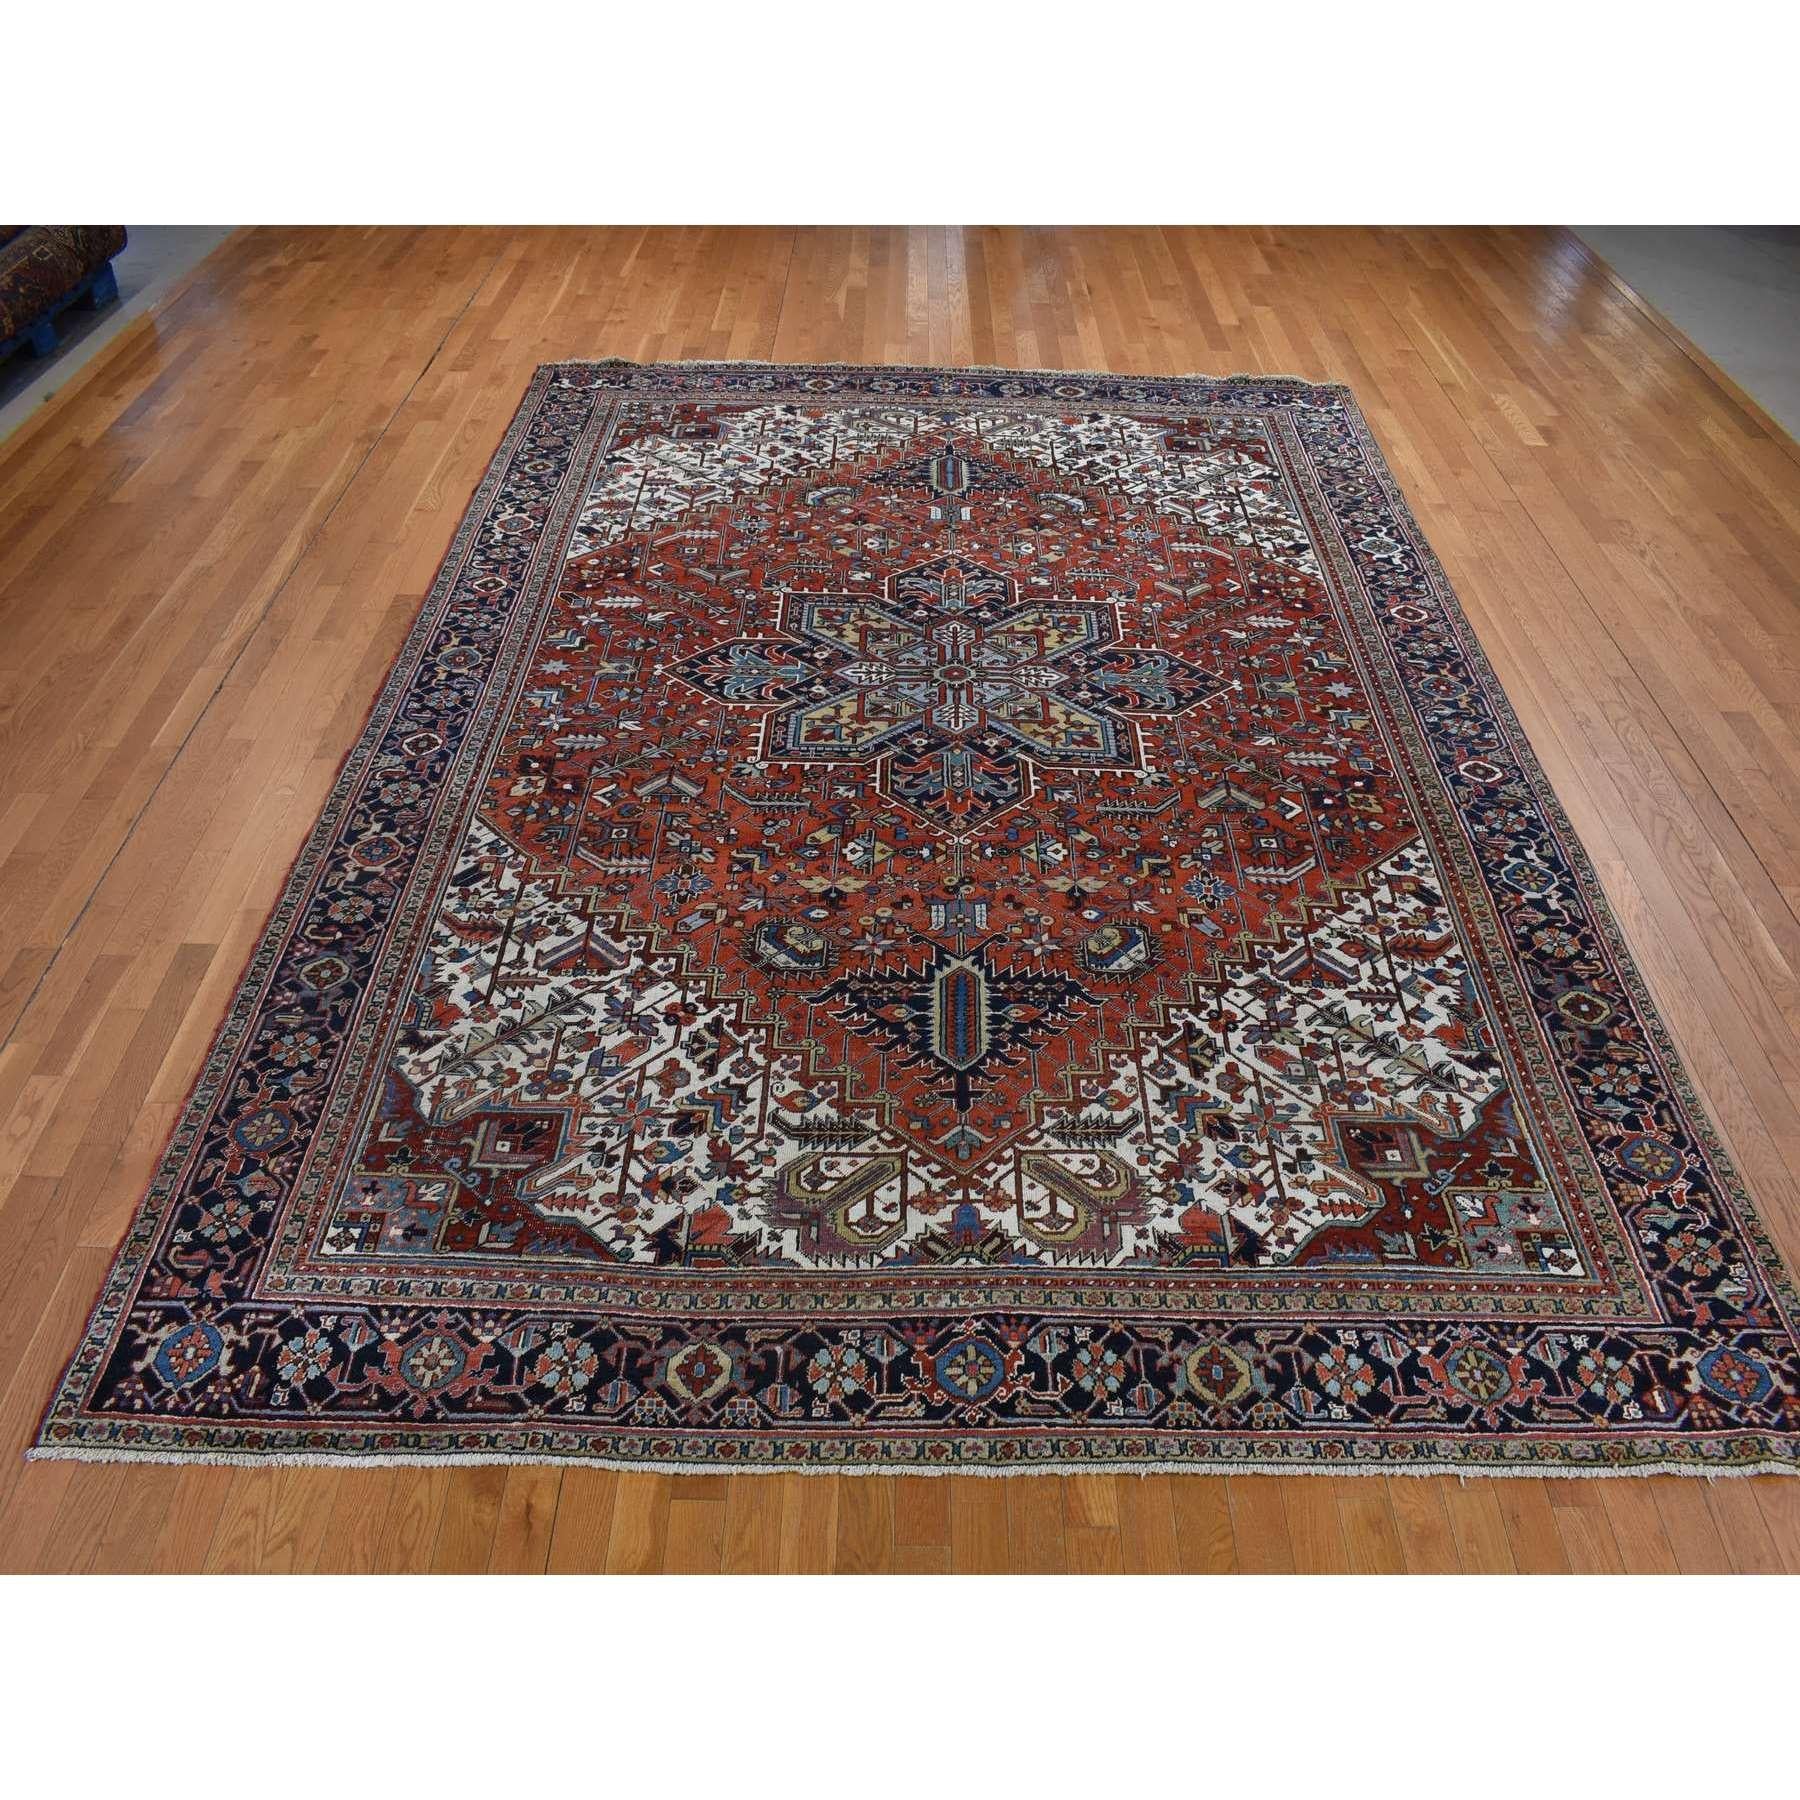 Heriz Serapi Brick Red, Antique Persian Heriz, Hand Knotted Excellent Condition Pure Wool Rug